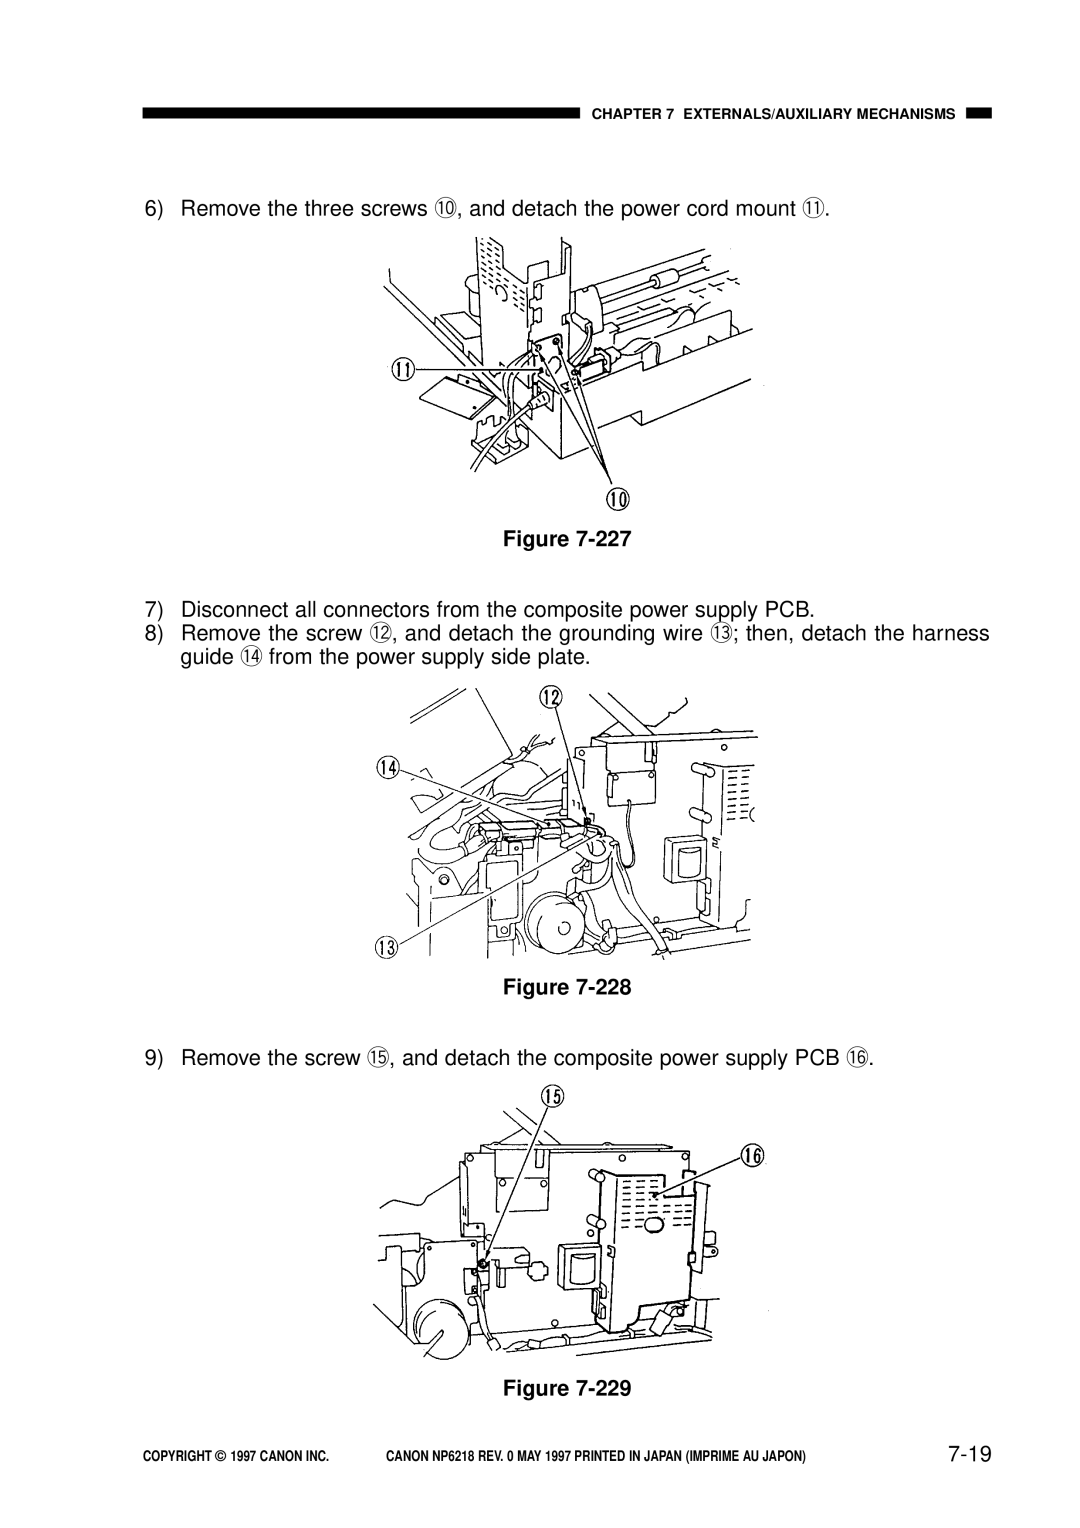 Canon NP6218, FY8-13EX-000 service manual 7-19, Remove the three screws !0, and detach the power cord mount !1 